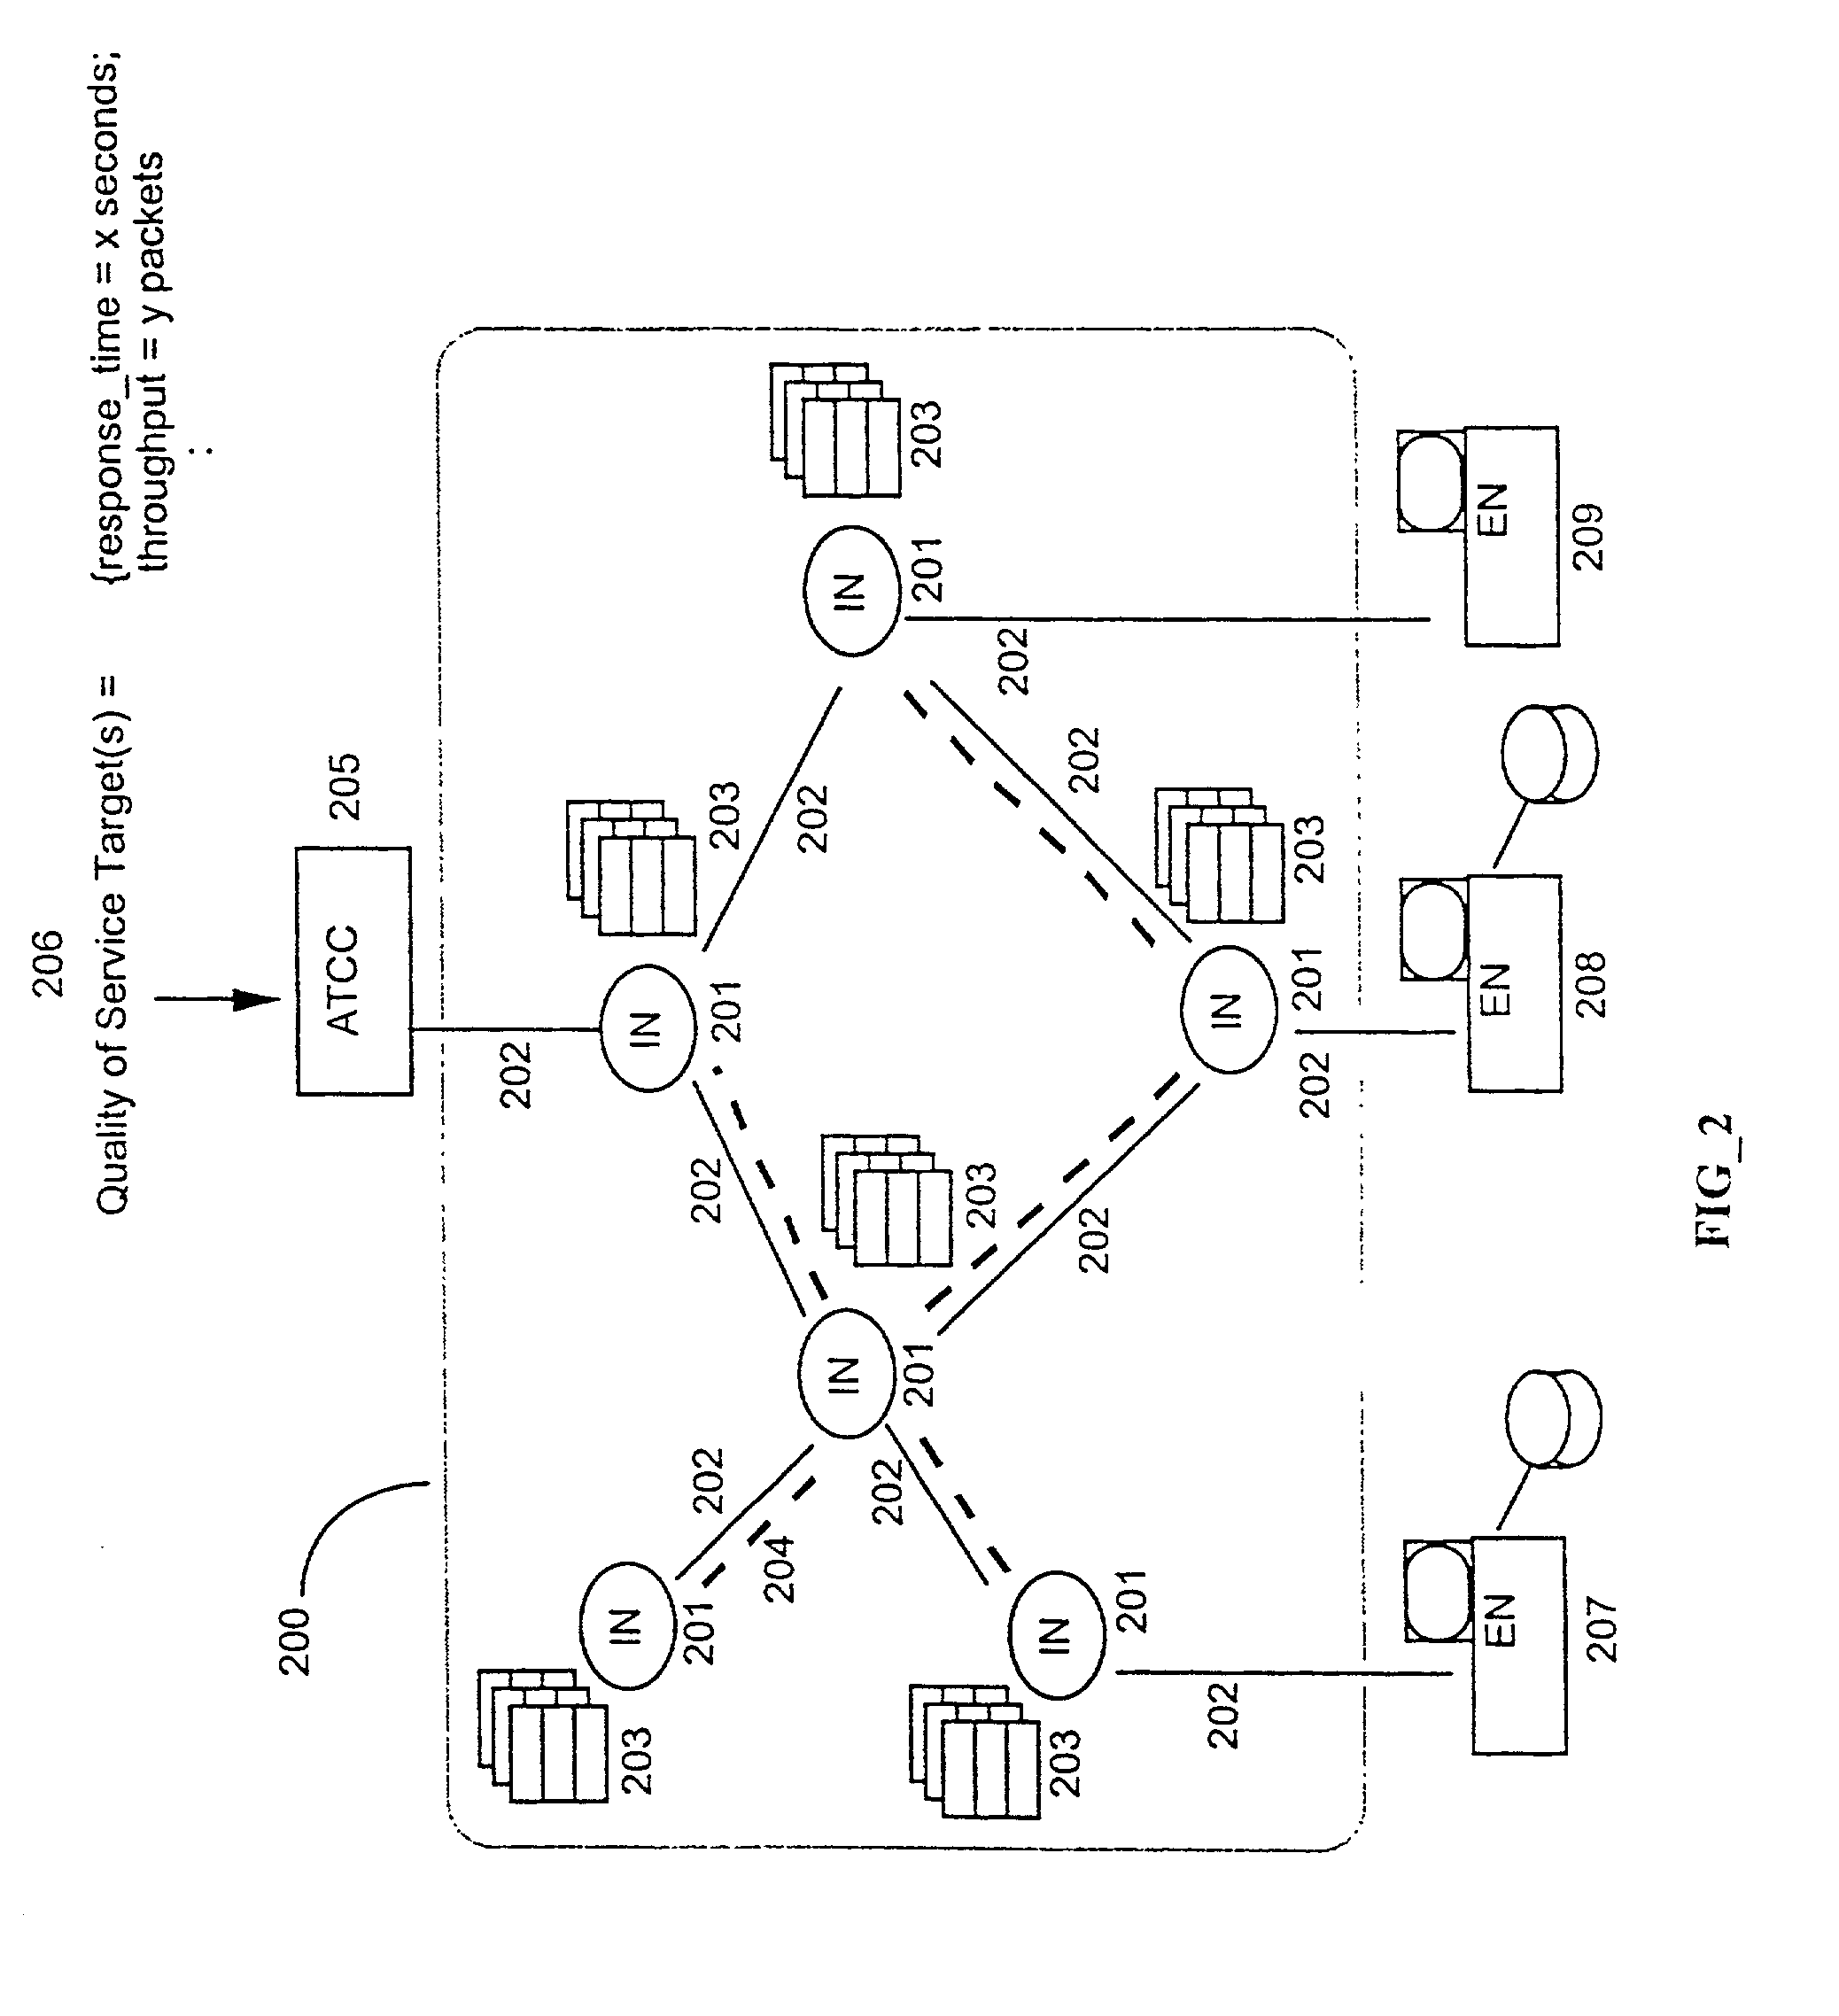 Automatic traffic and quality of service control system for communications networks